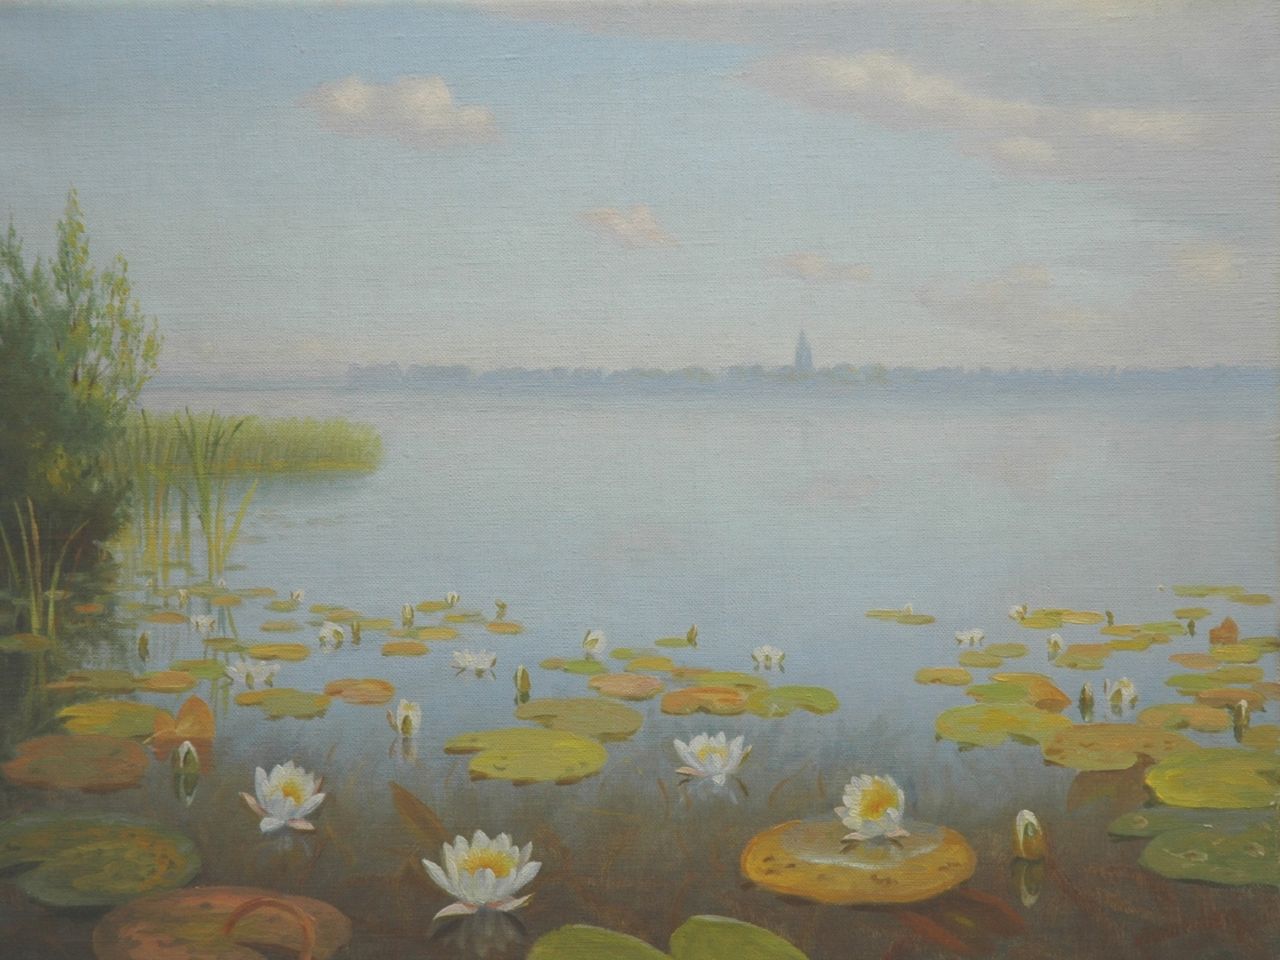 Smorenberg D.  | Dirk Smorenberg, Loosdrecht, oil on canvas 40.3 x 53.0 cm, signed l.r. and dated 1953 on the reverse